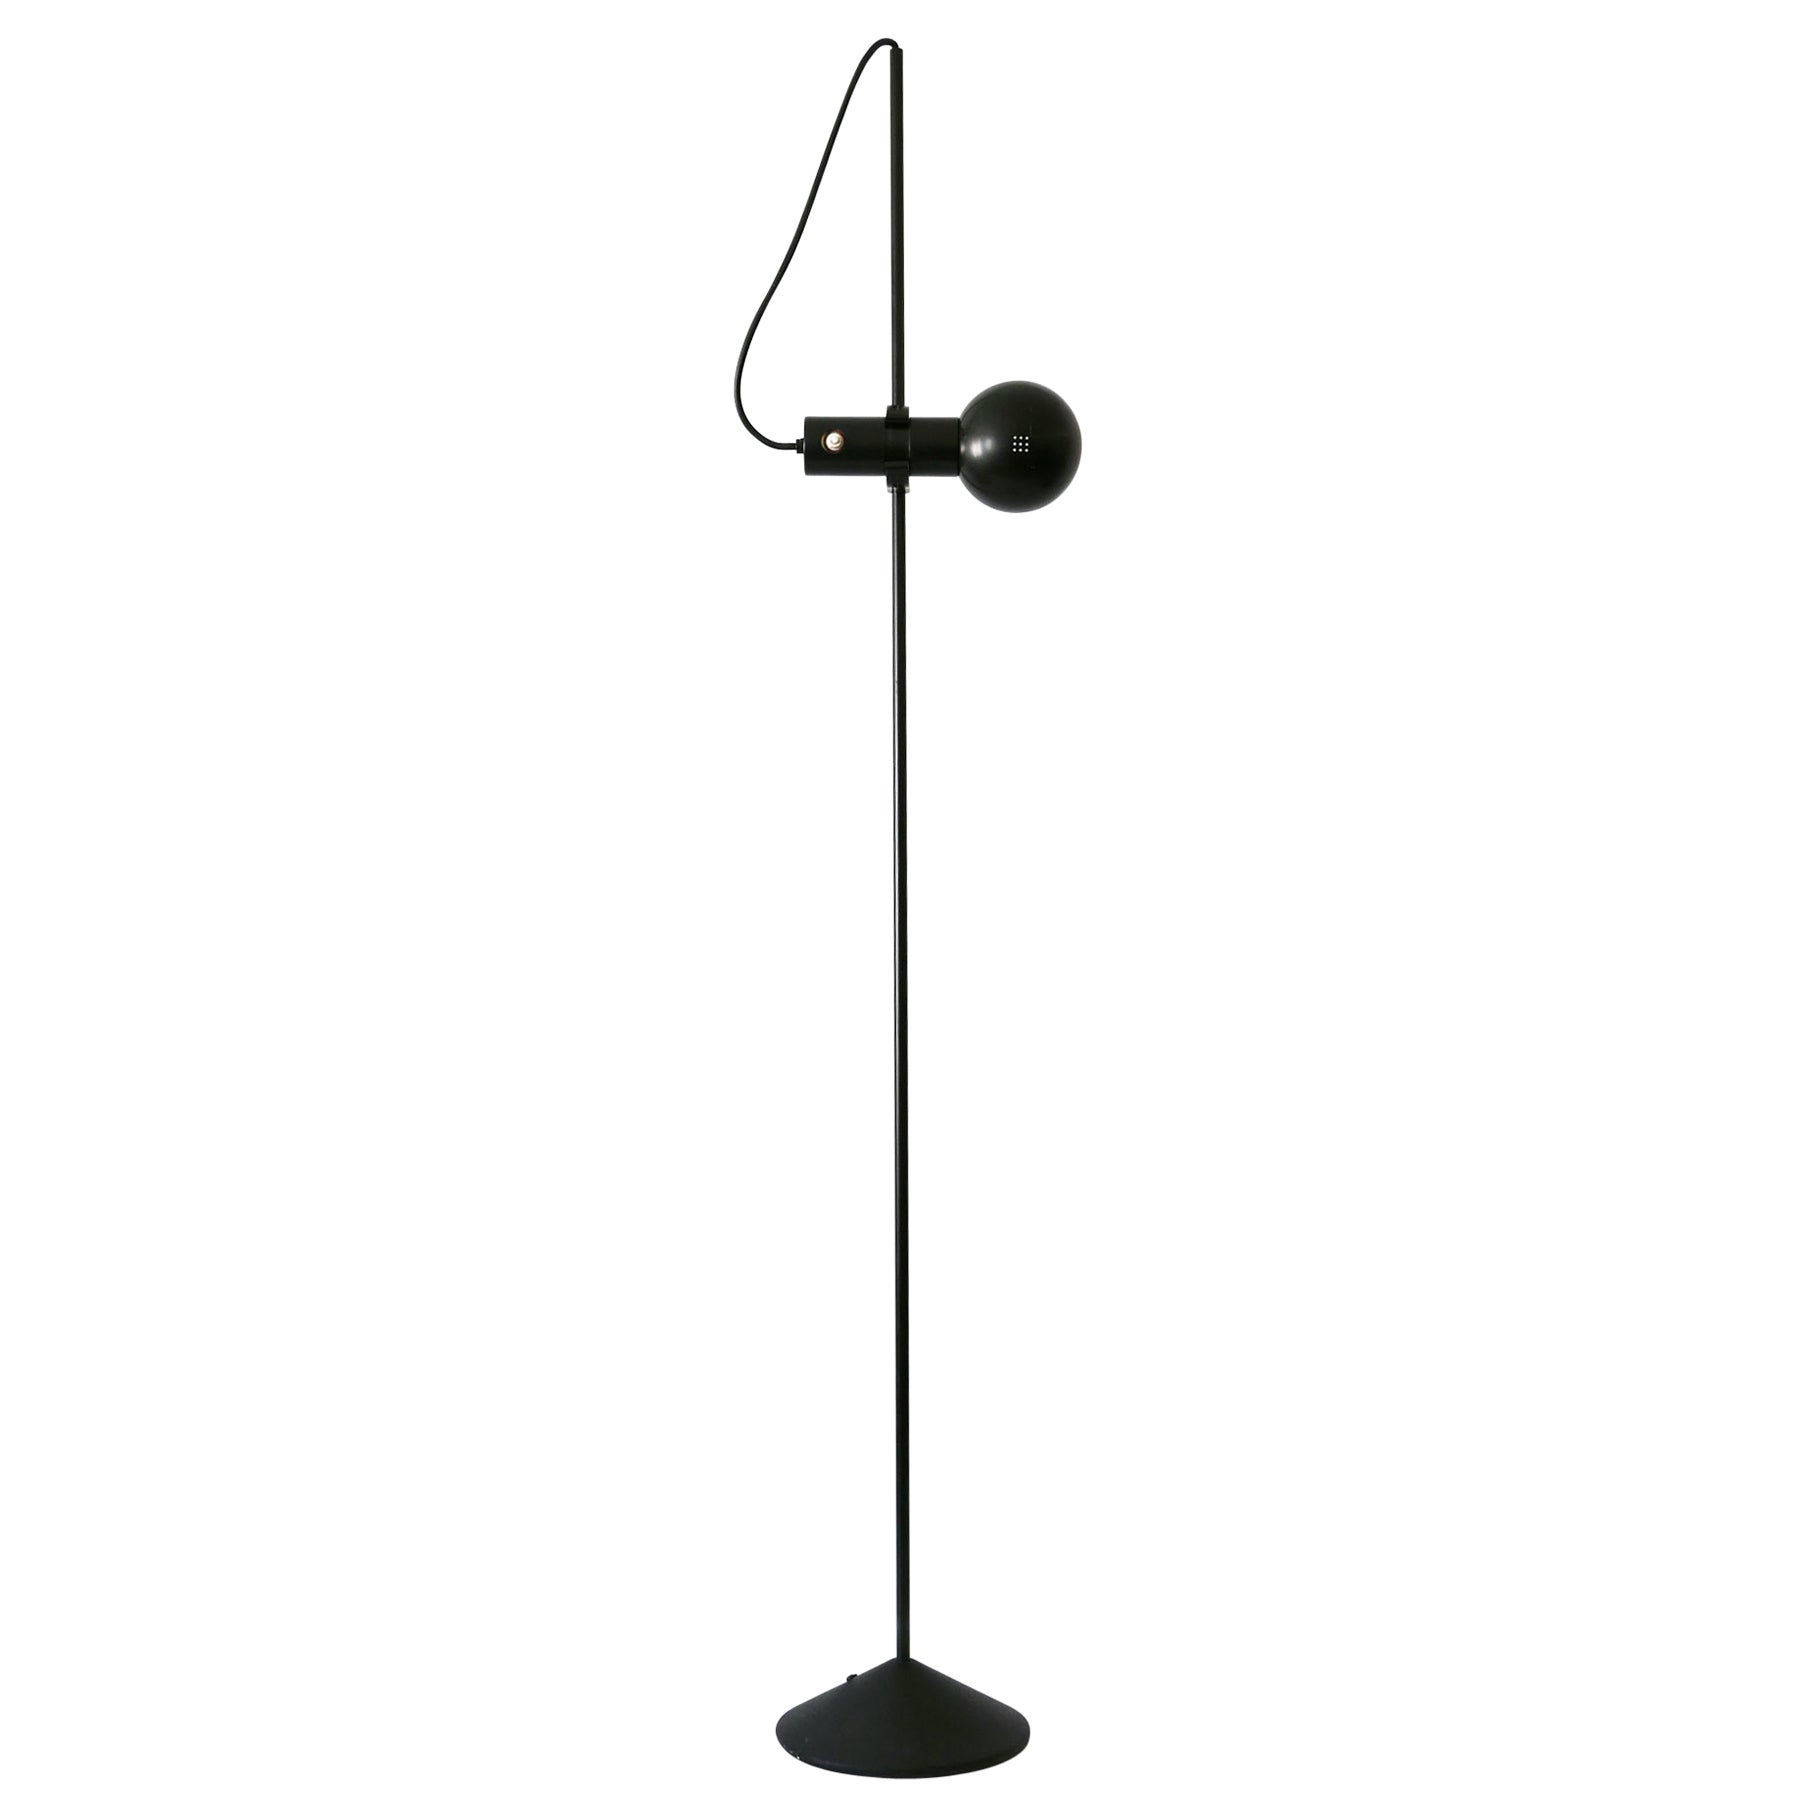 Rare Floor Lamp or Reading Light by Barbieri e Marianelli for Tronconi 1970s For Sale